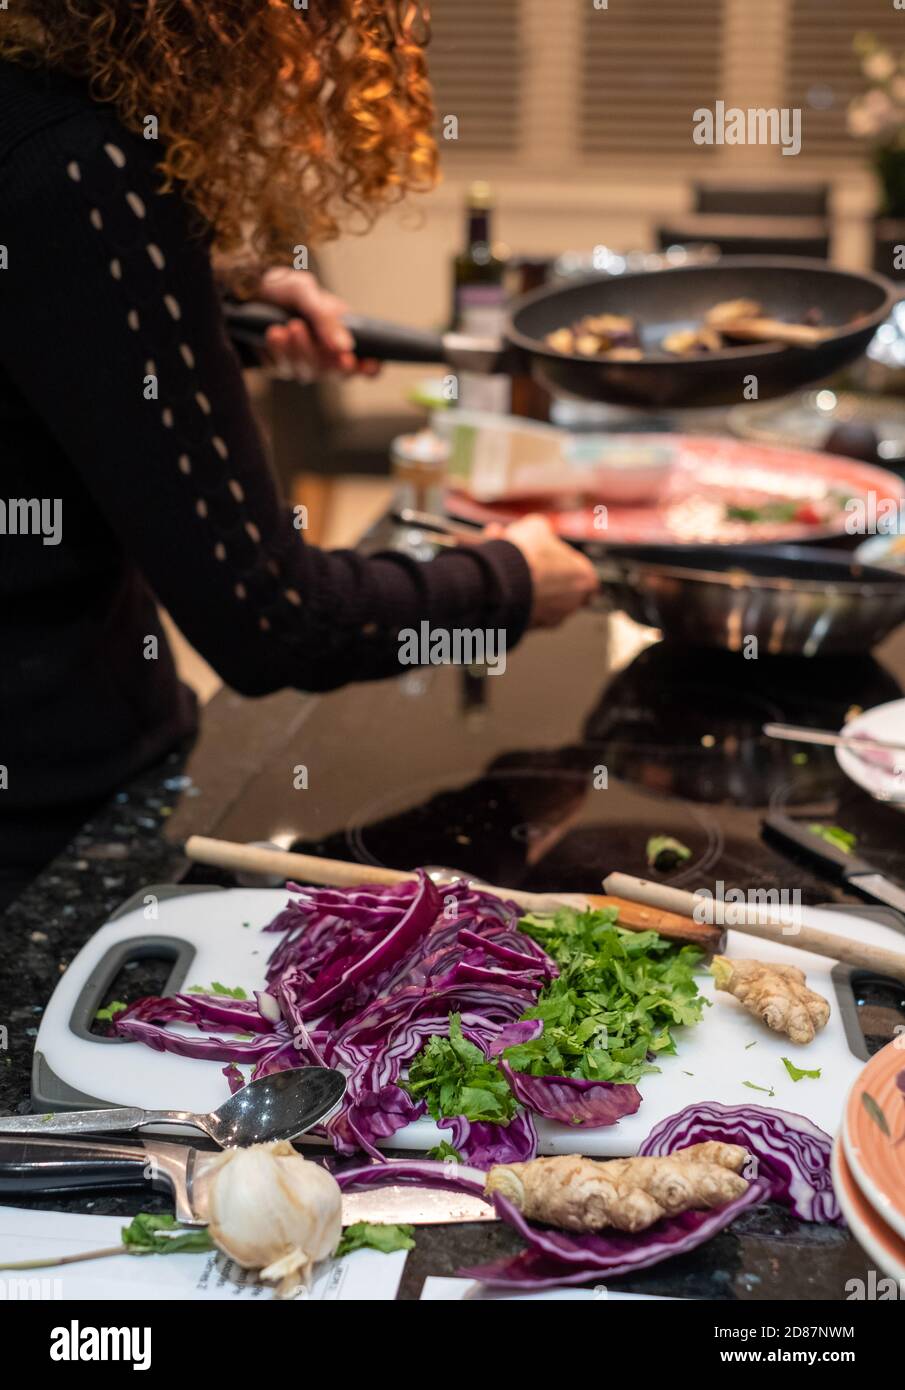 Preparing a vegan Asian Pad Thai stir fry with red cabbage, aubergine, tofu and noodles. Stock Photo